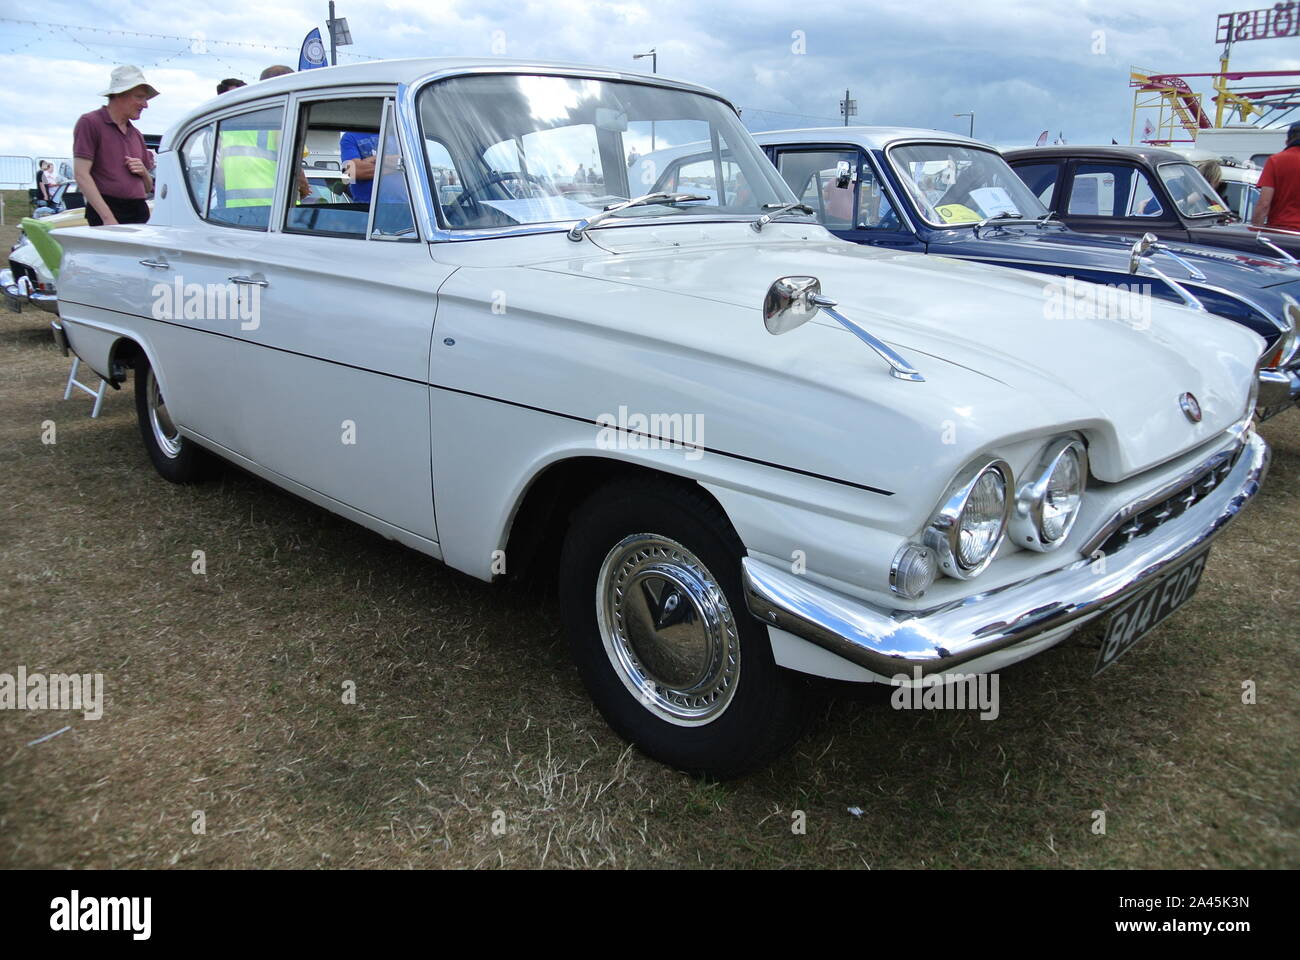 A 1962 Ford Consul Classic car parked up on display at the English Riviera classic car show, Paignton, Devon, England, UK. Stock Photo